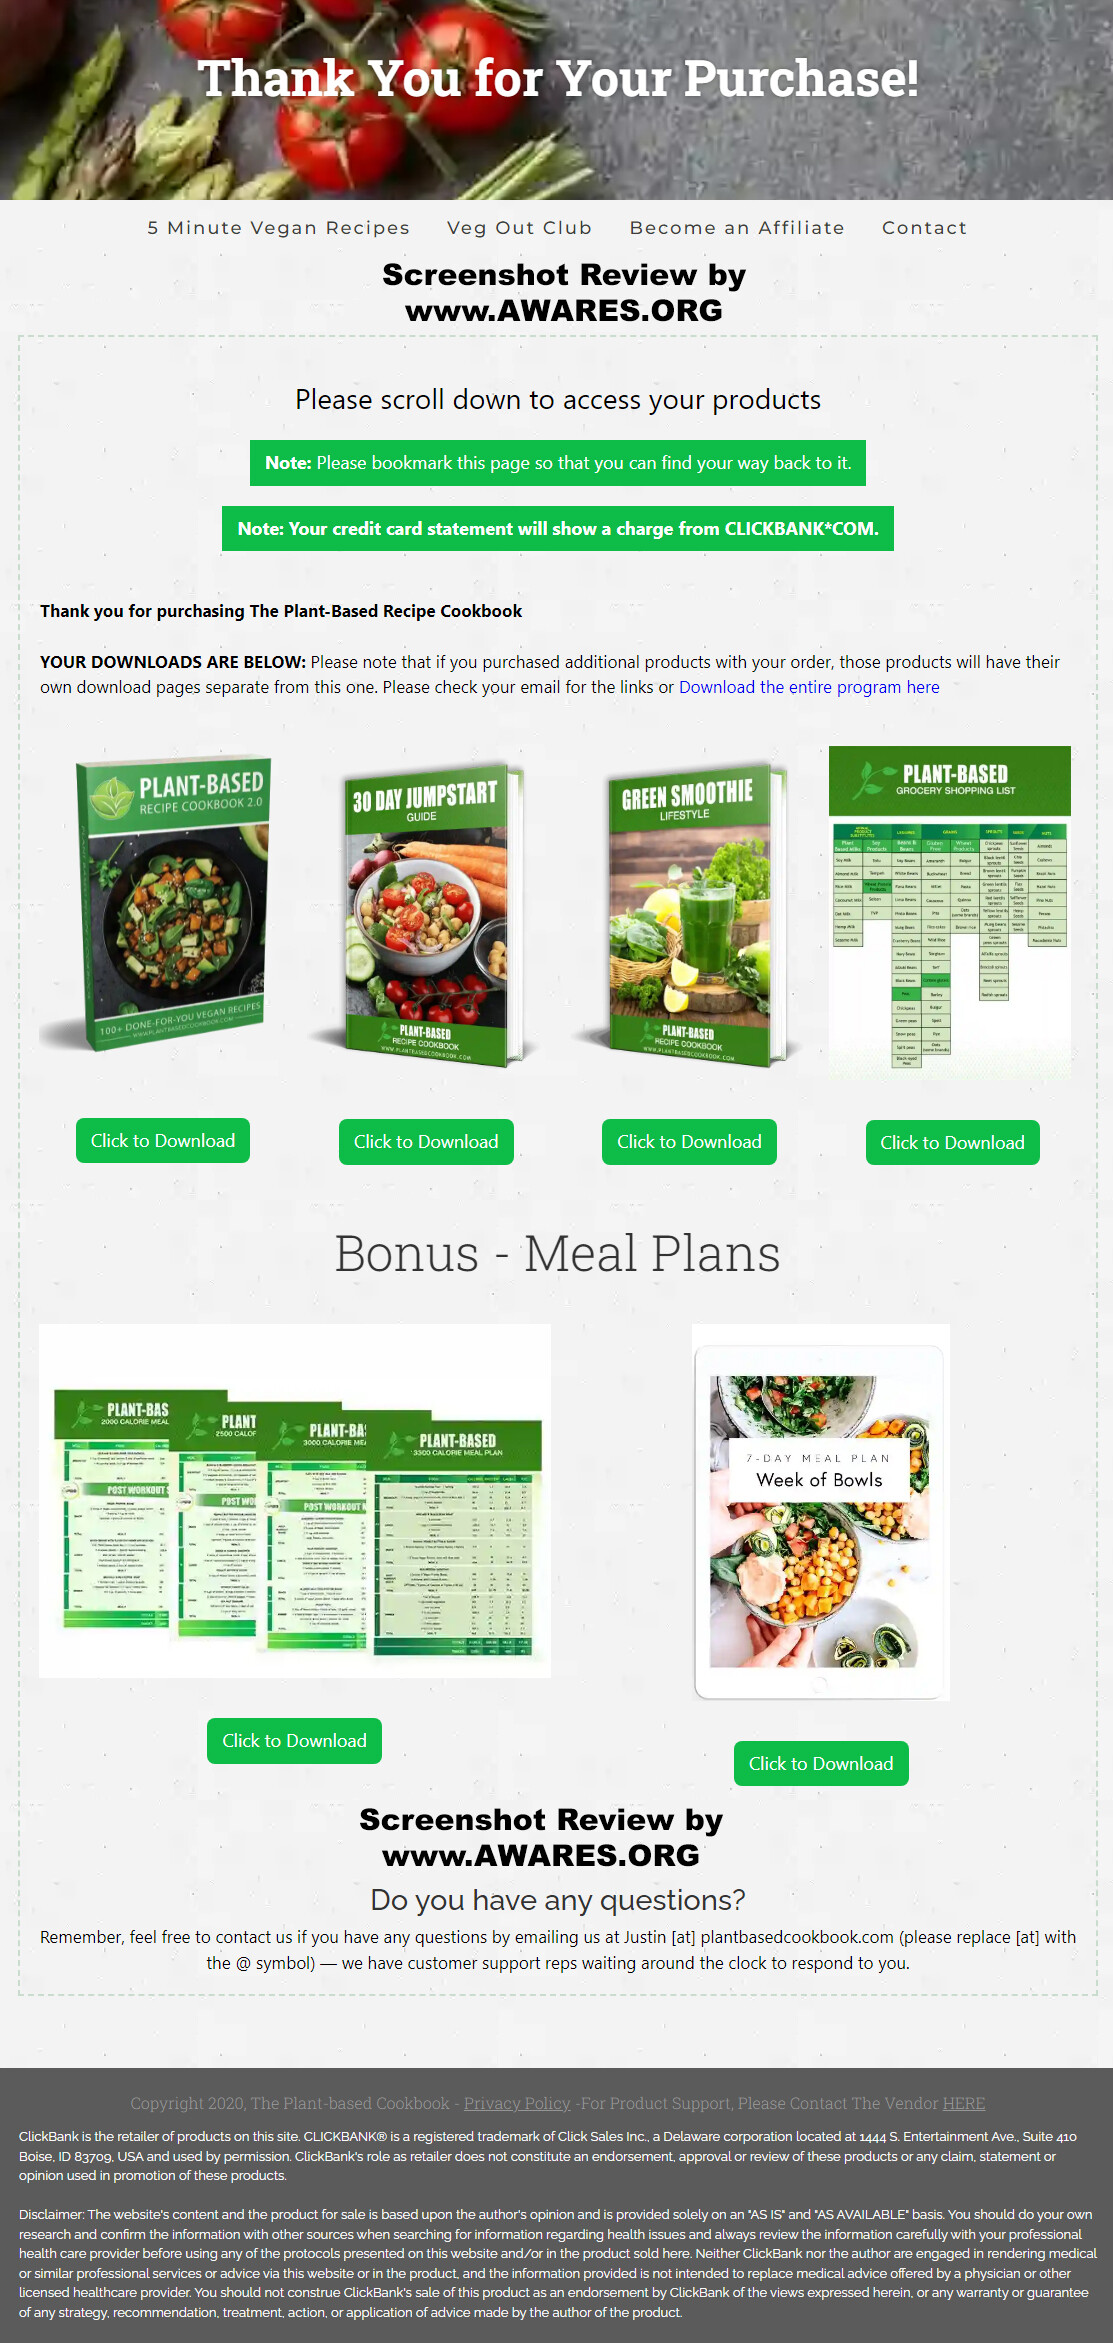 The Plant-Based Recipe Cookbook Download Page